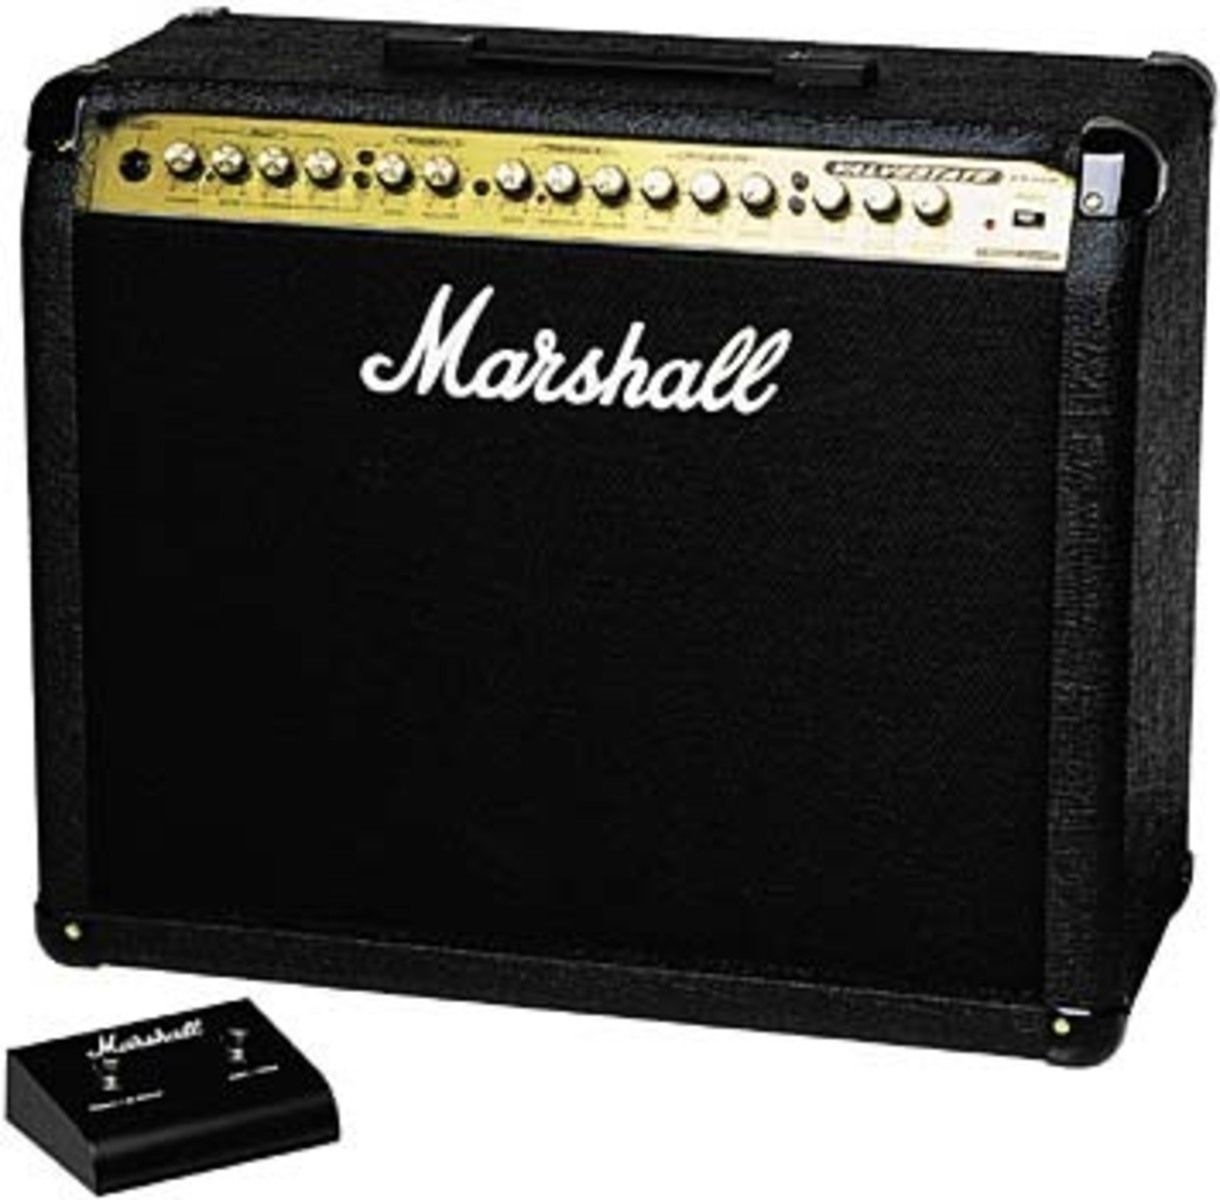 Marshall+Amps Format: jpg - Size: 1220 x 1200 - Weight: 104K ...